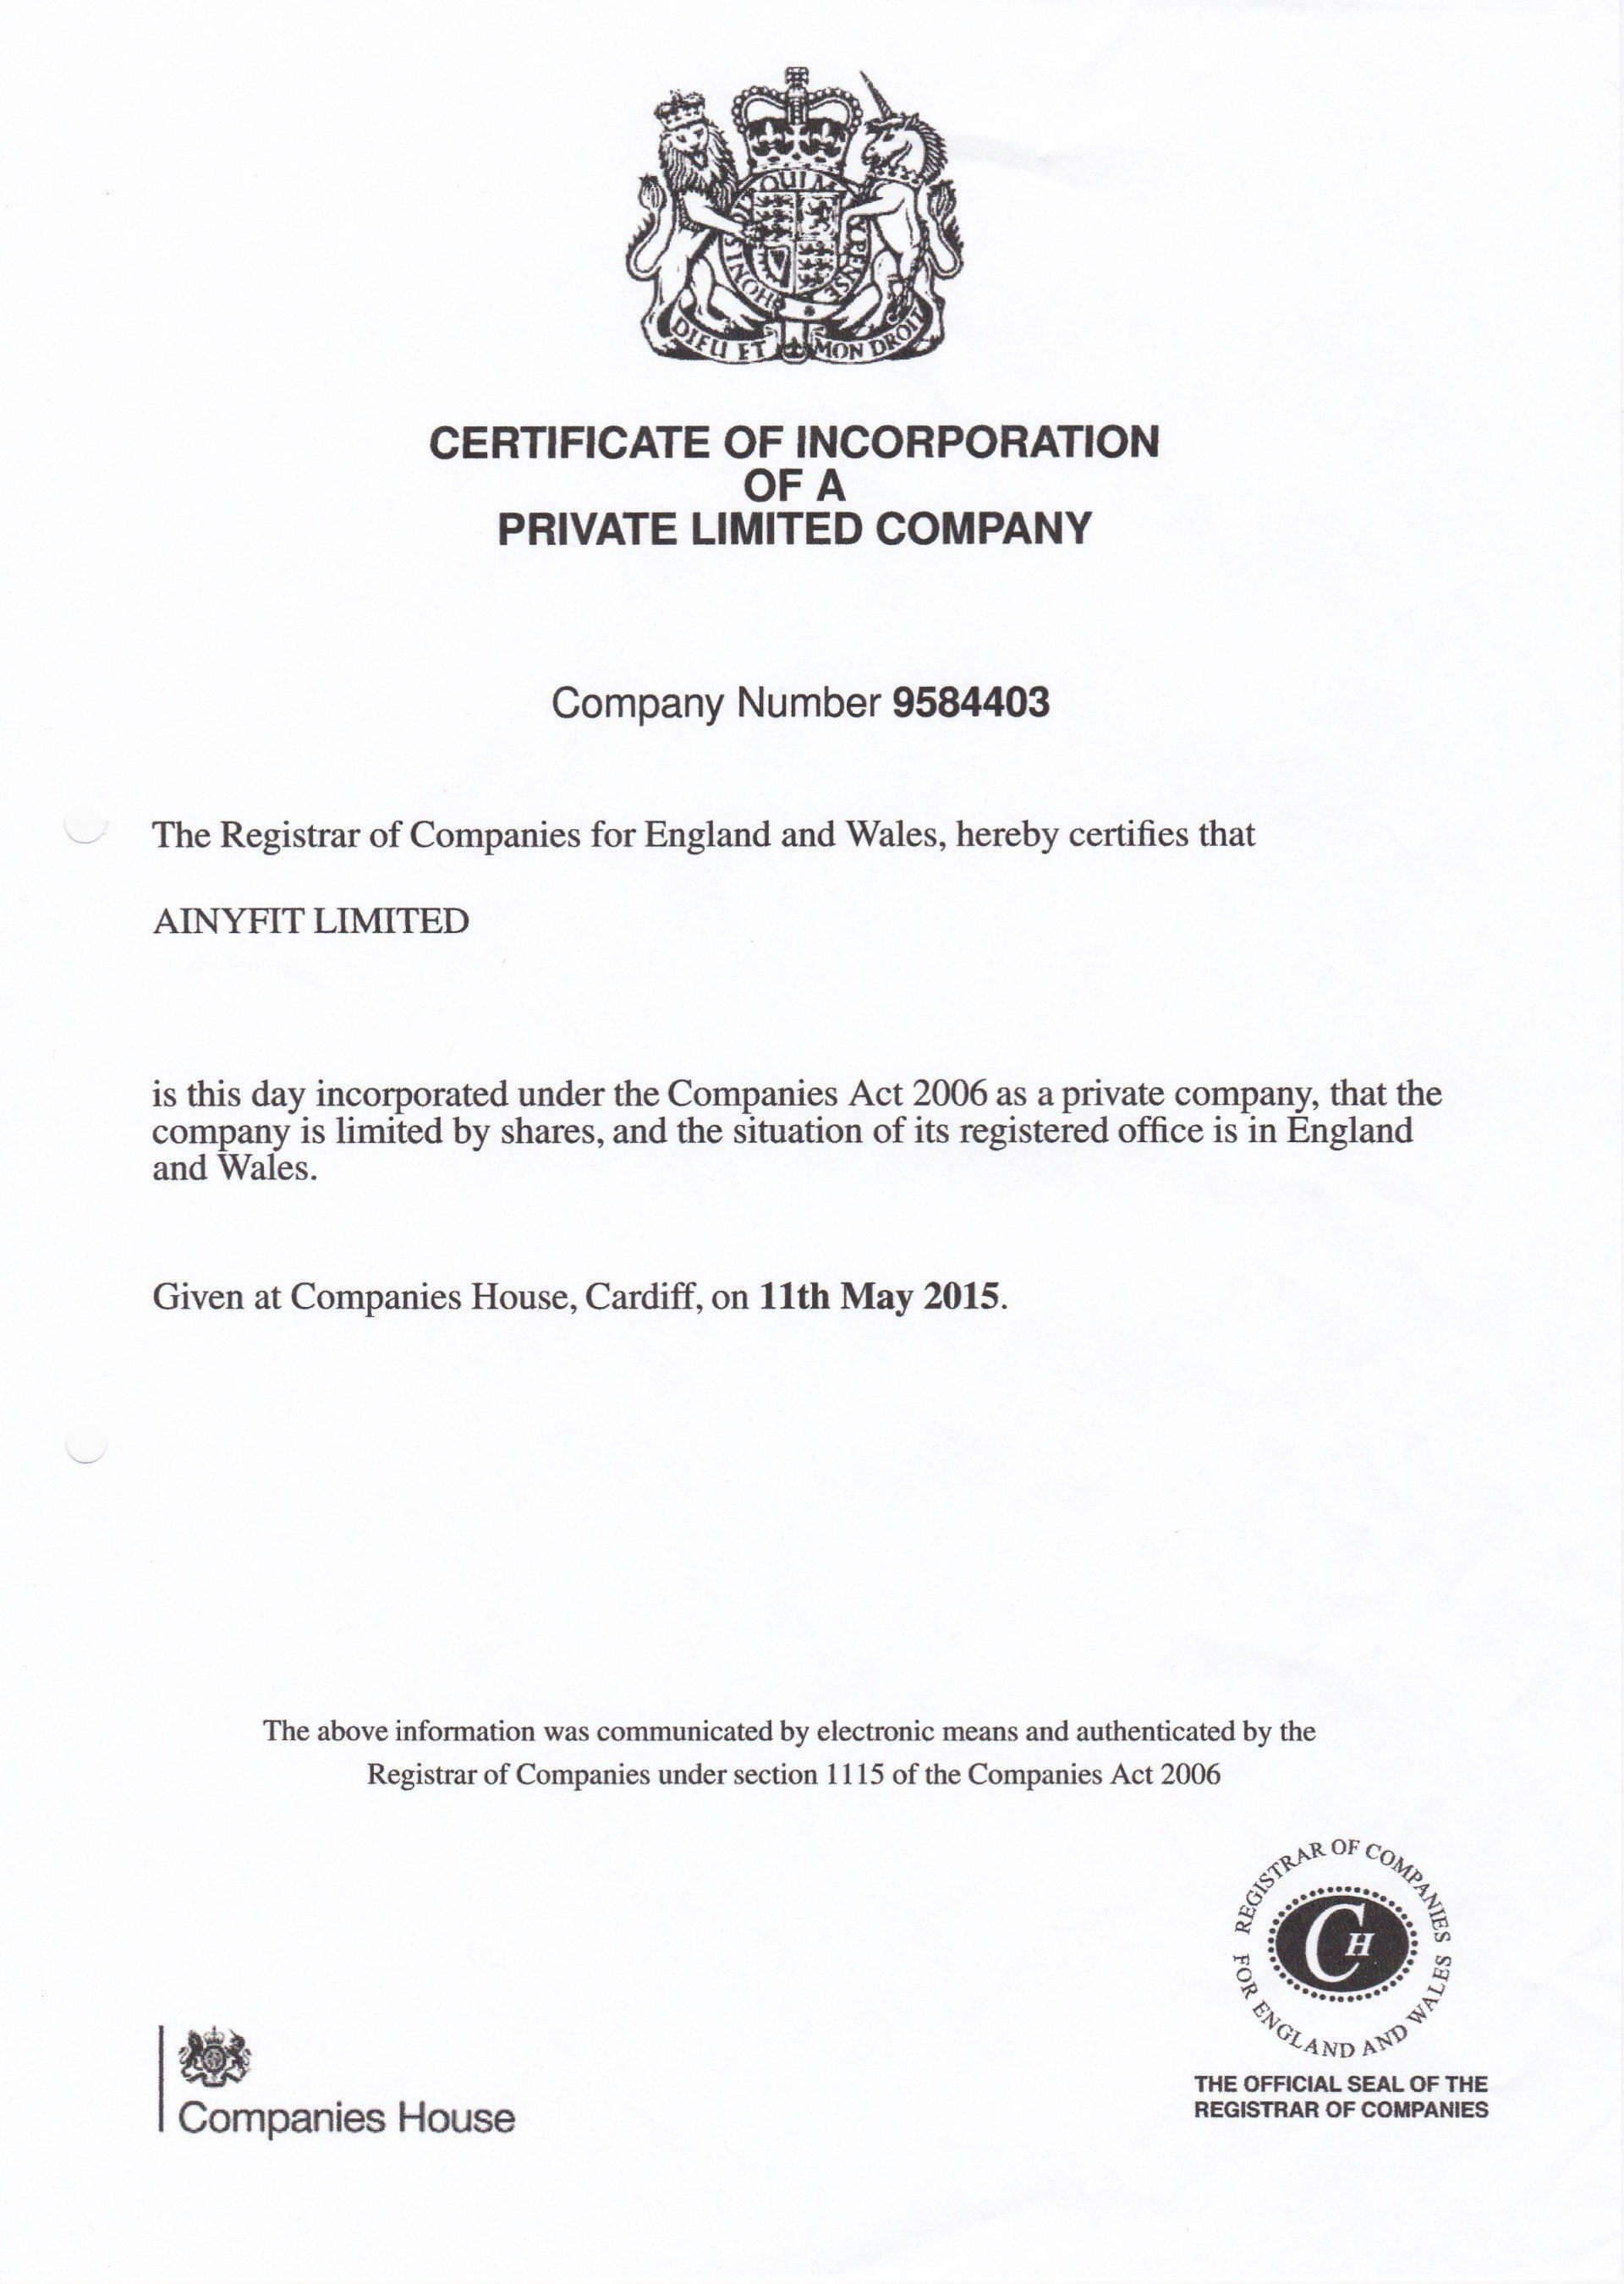 AinyFit Ltd Company Registration and Certificate of Incorporation - 11th May 2015